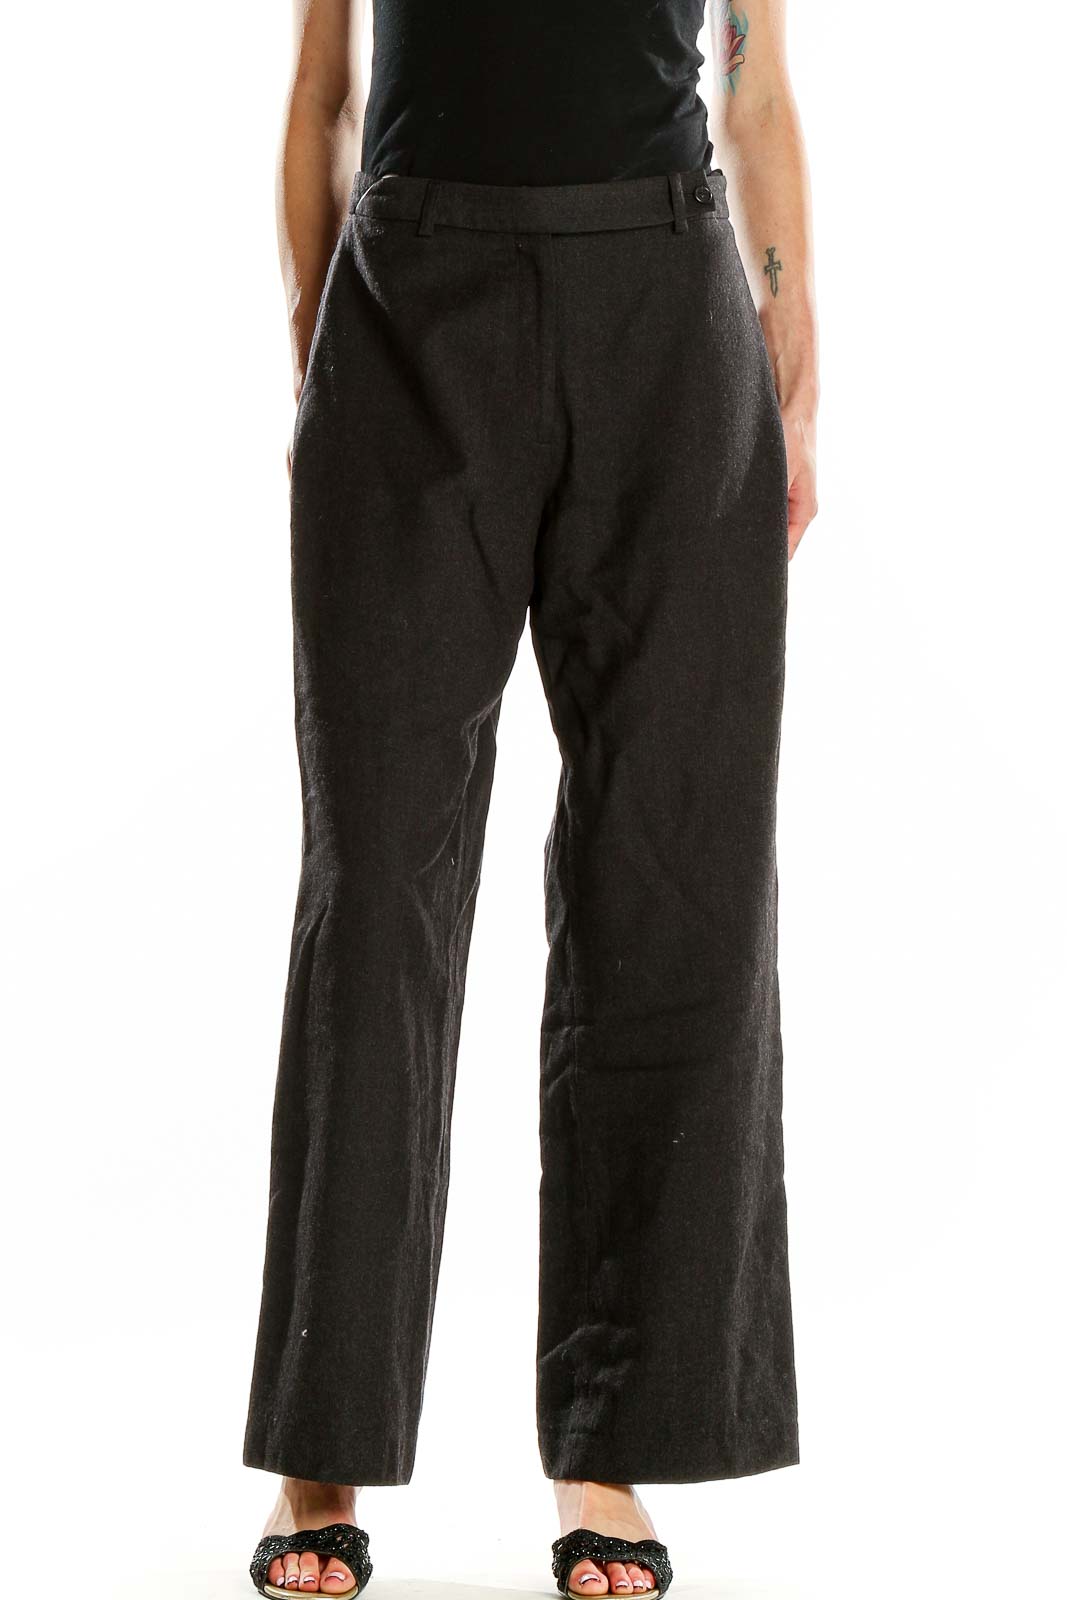 Gray Straight Full Length Texture Pants Front